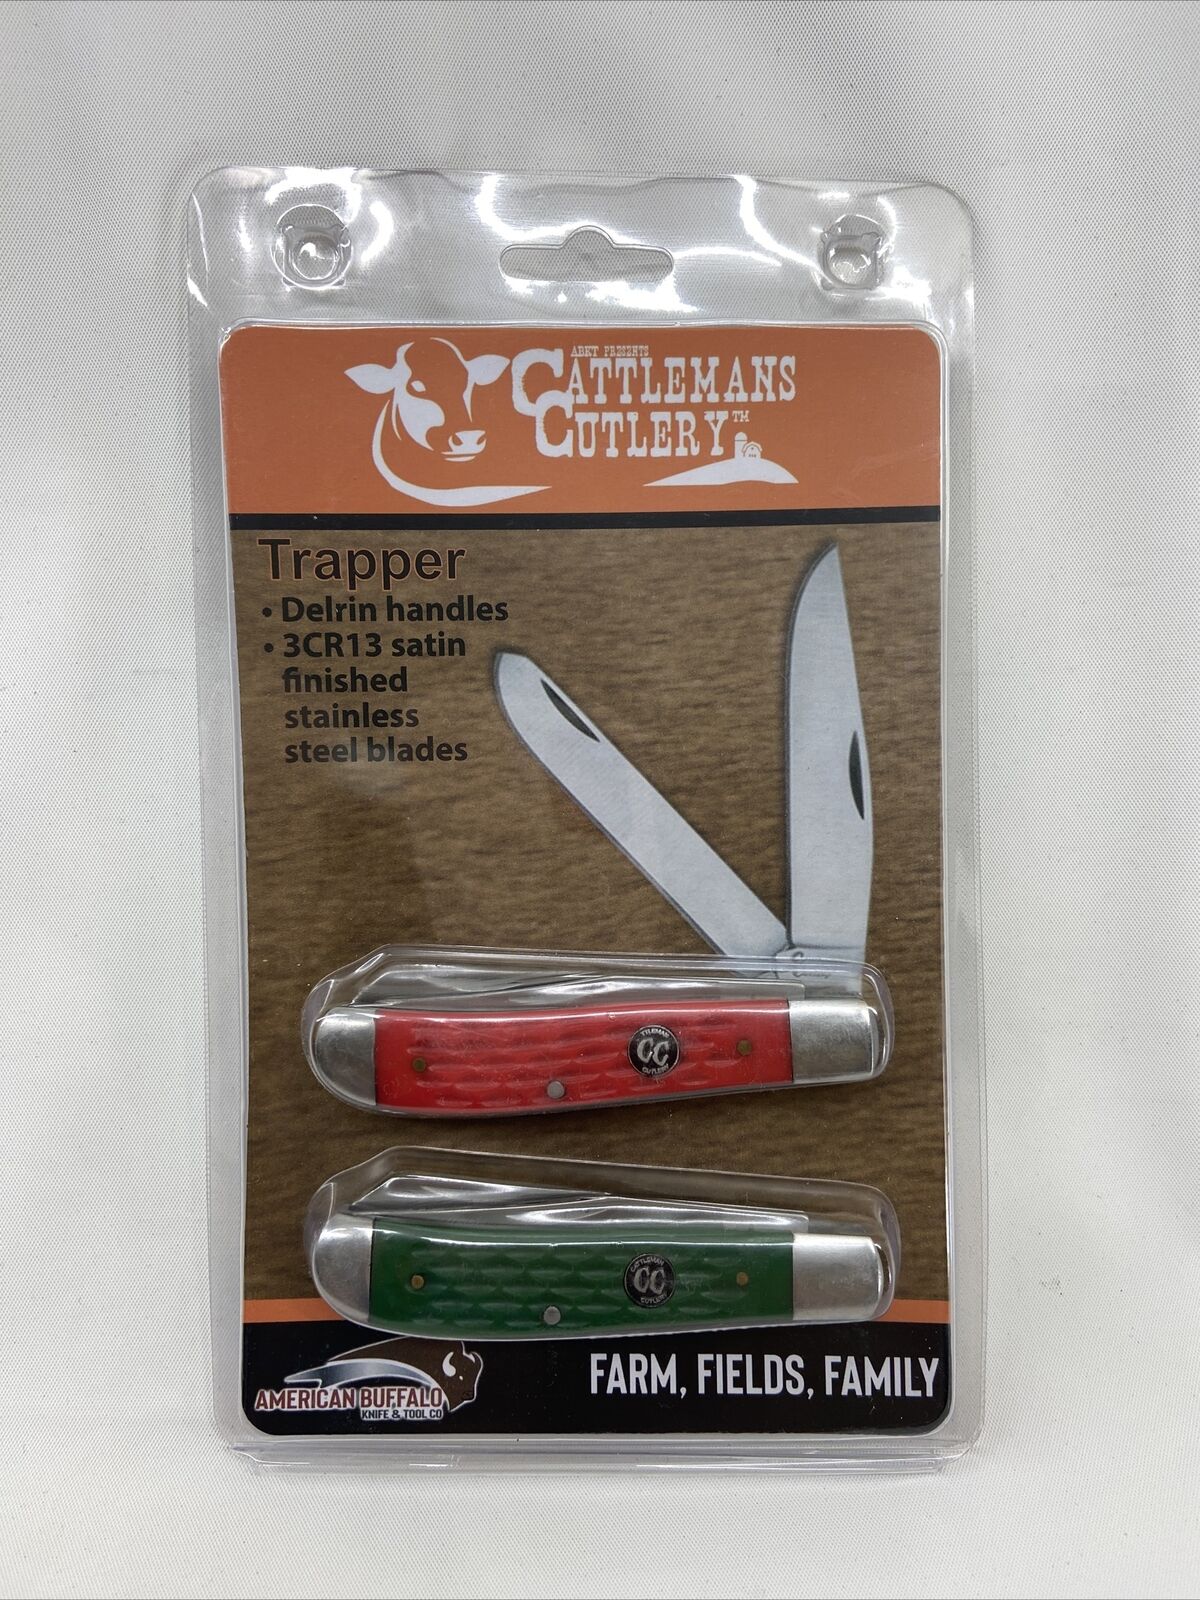 Pack of 2 Signature Trapper Folding Knifes Cattleman\'s Cutlery 3CR13 Stainless